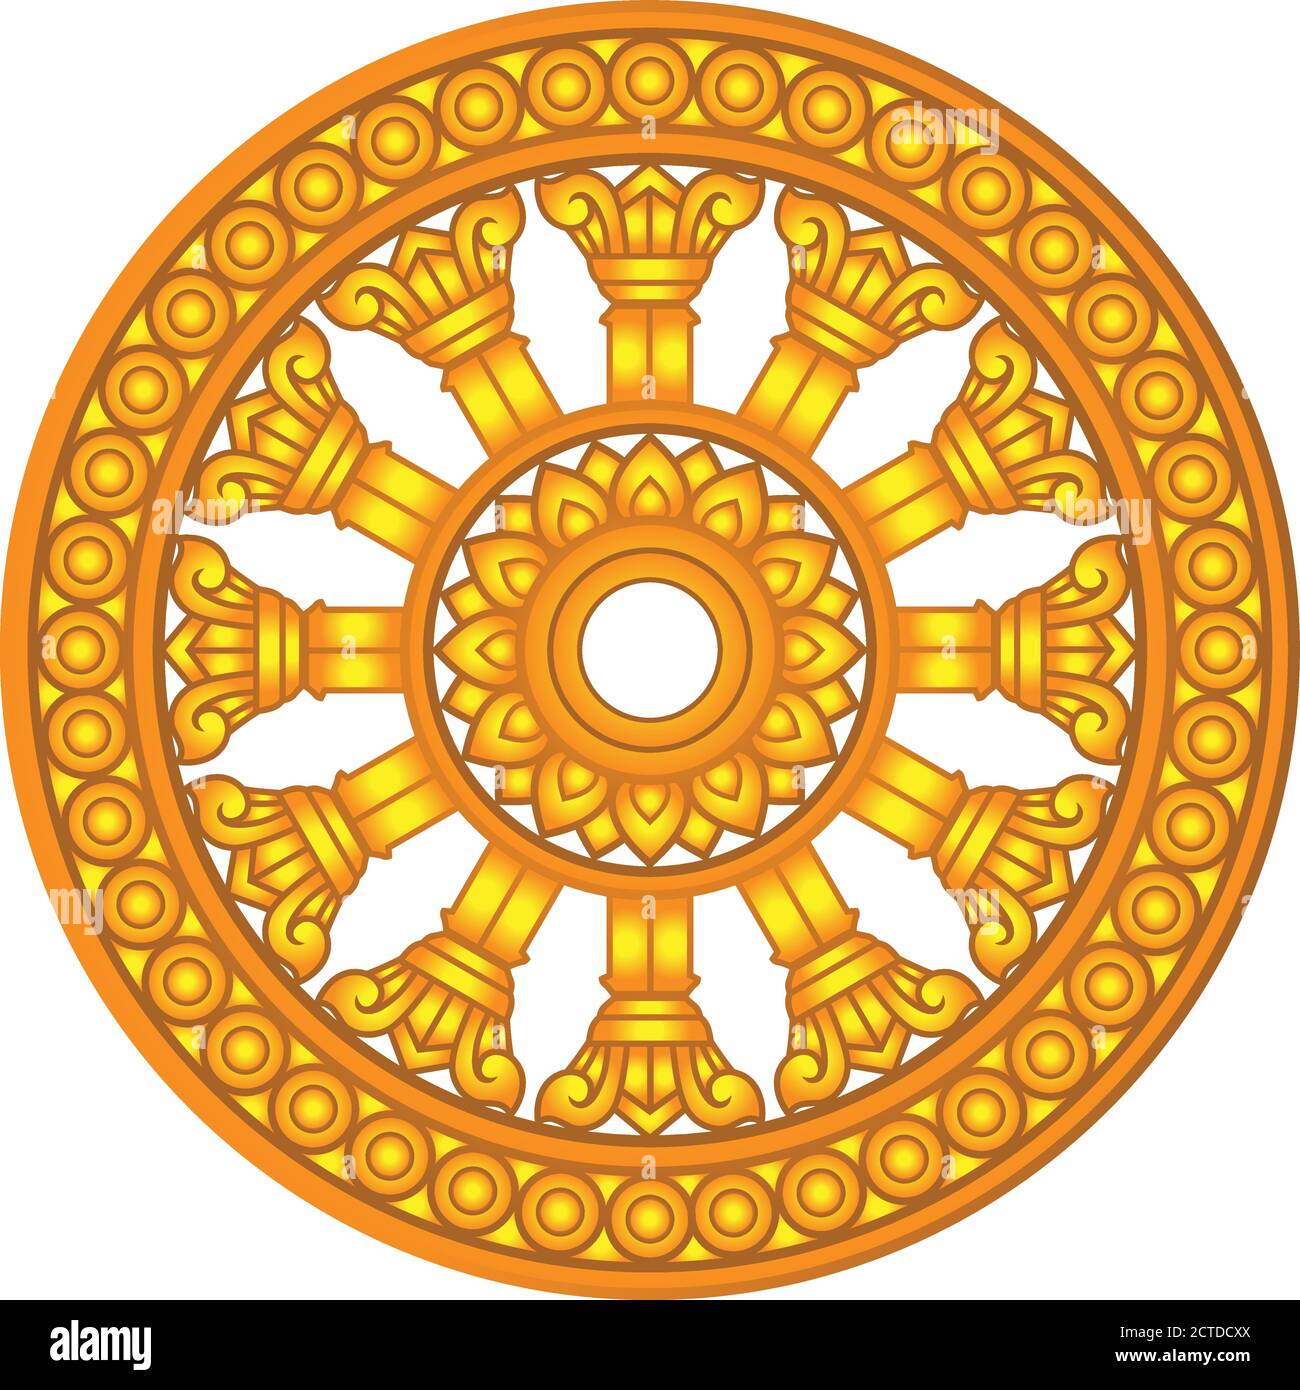 Golden dharma wheel in Buddhism religion concept. another name is Dhamma Chak or Wheel of Dharma This picture is used as a symbol of the Thai Sangha. Stock Vector